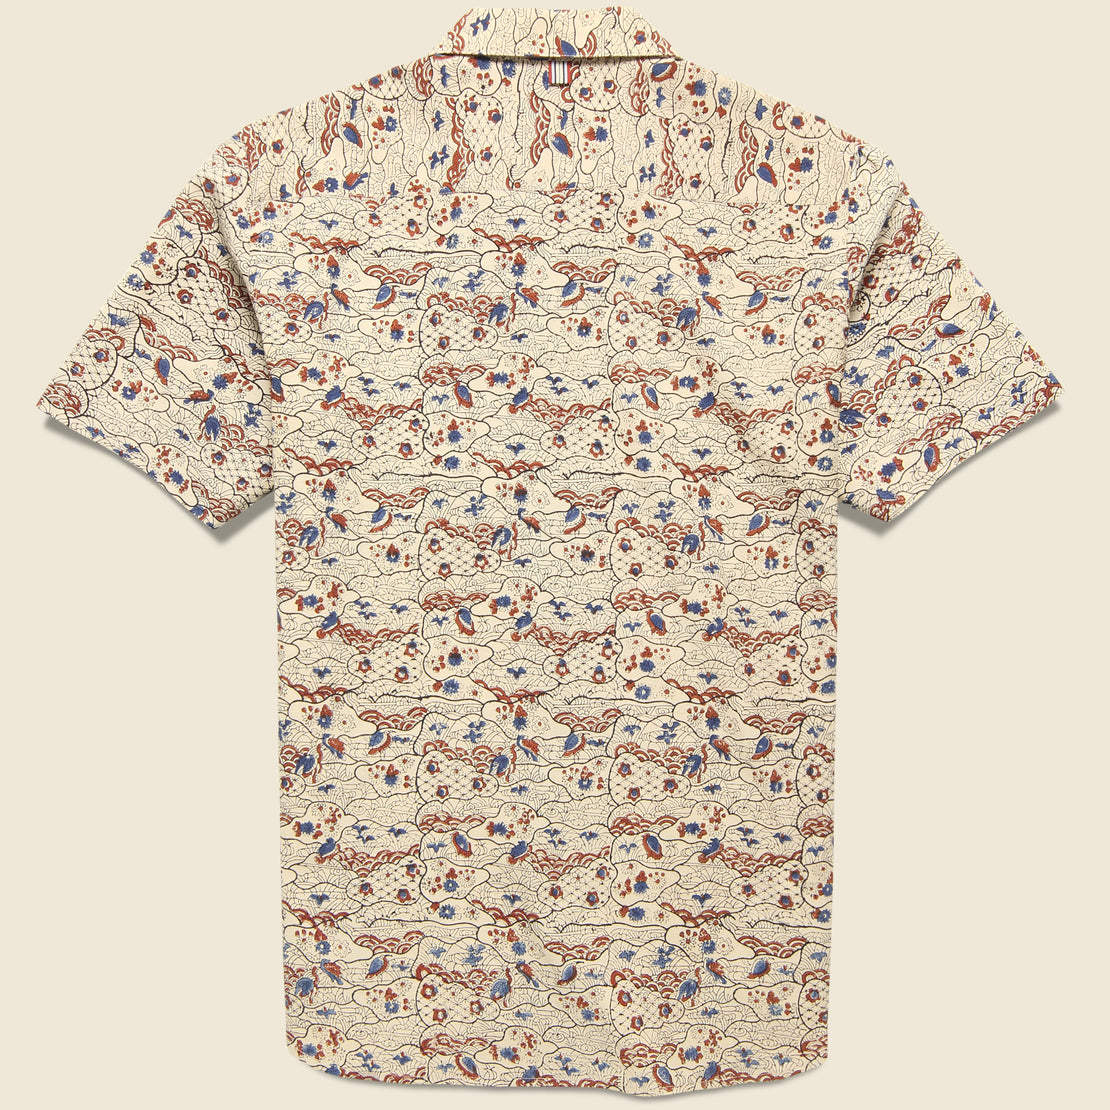 Lamar Block Print Rainbow & Birds Shirt - Tan/Red - Kardo - STAG Provisions - Tops - S/S Woven - Other Pattern